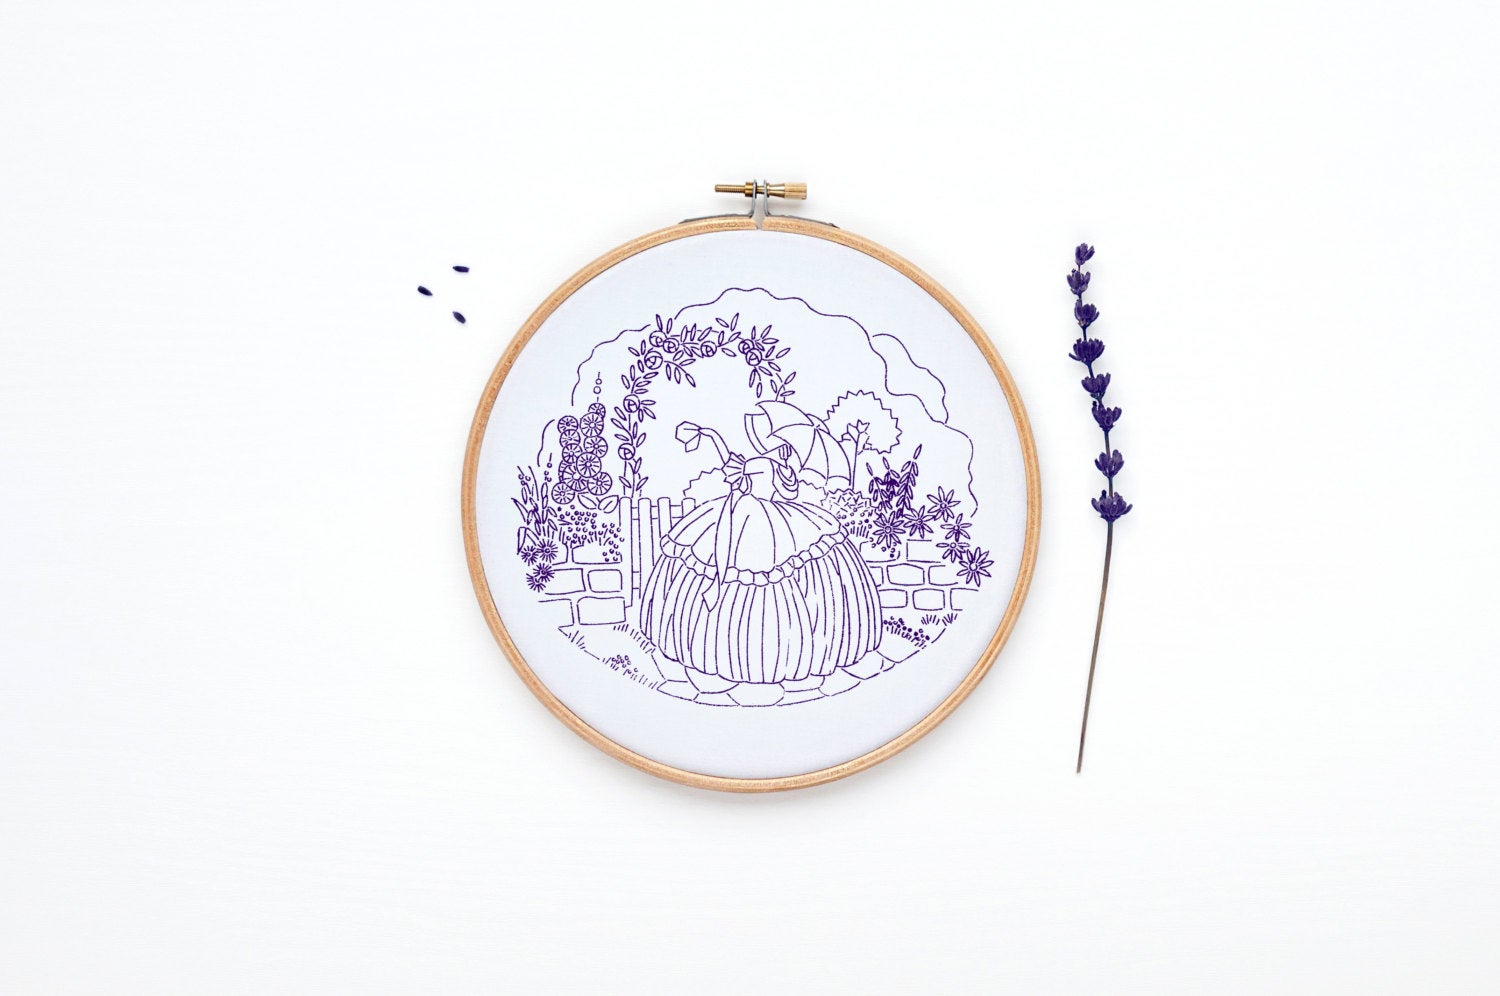 Printable Embroidery Patterns Hand Embroidery Vintage Pdf Pattern Crinoline Lady Embroidery Printable Embroidery Patterns Embroidery Pattern Pdf